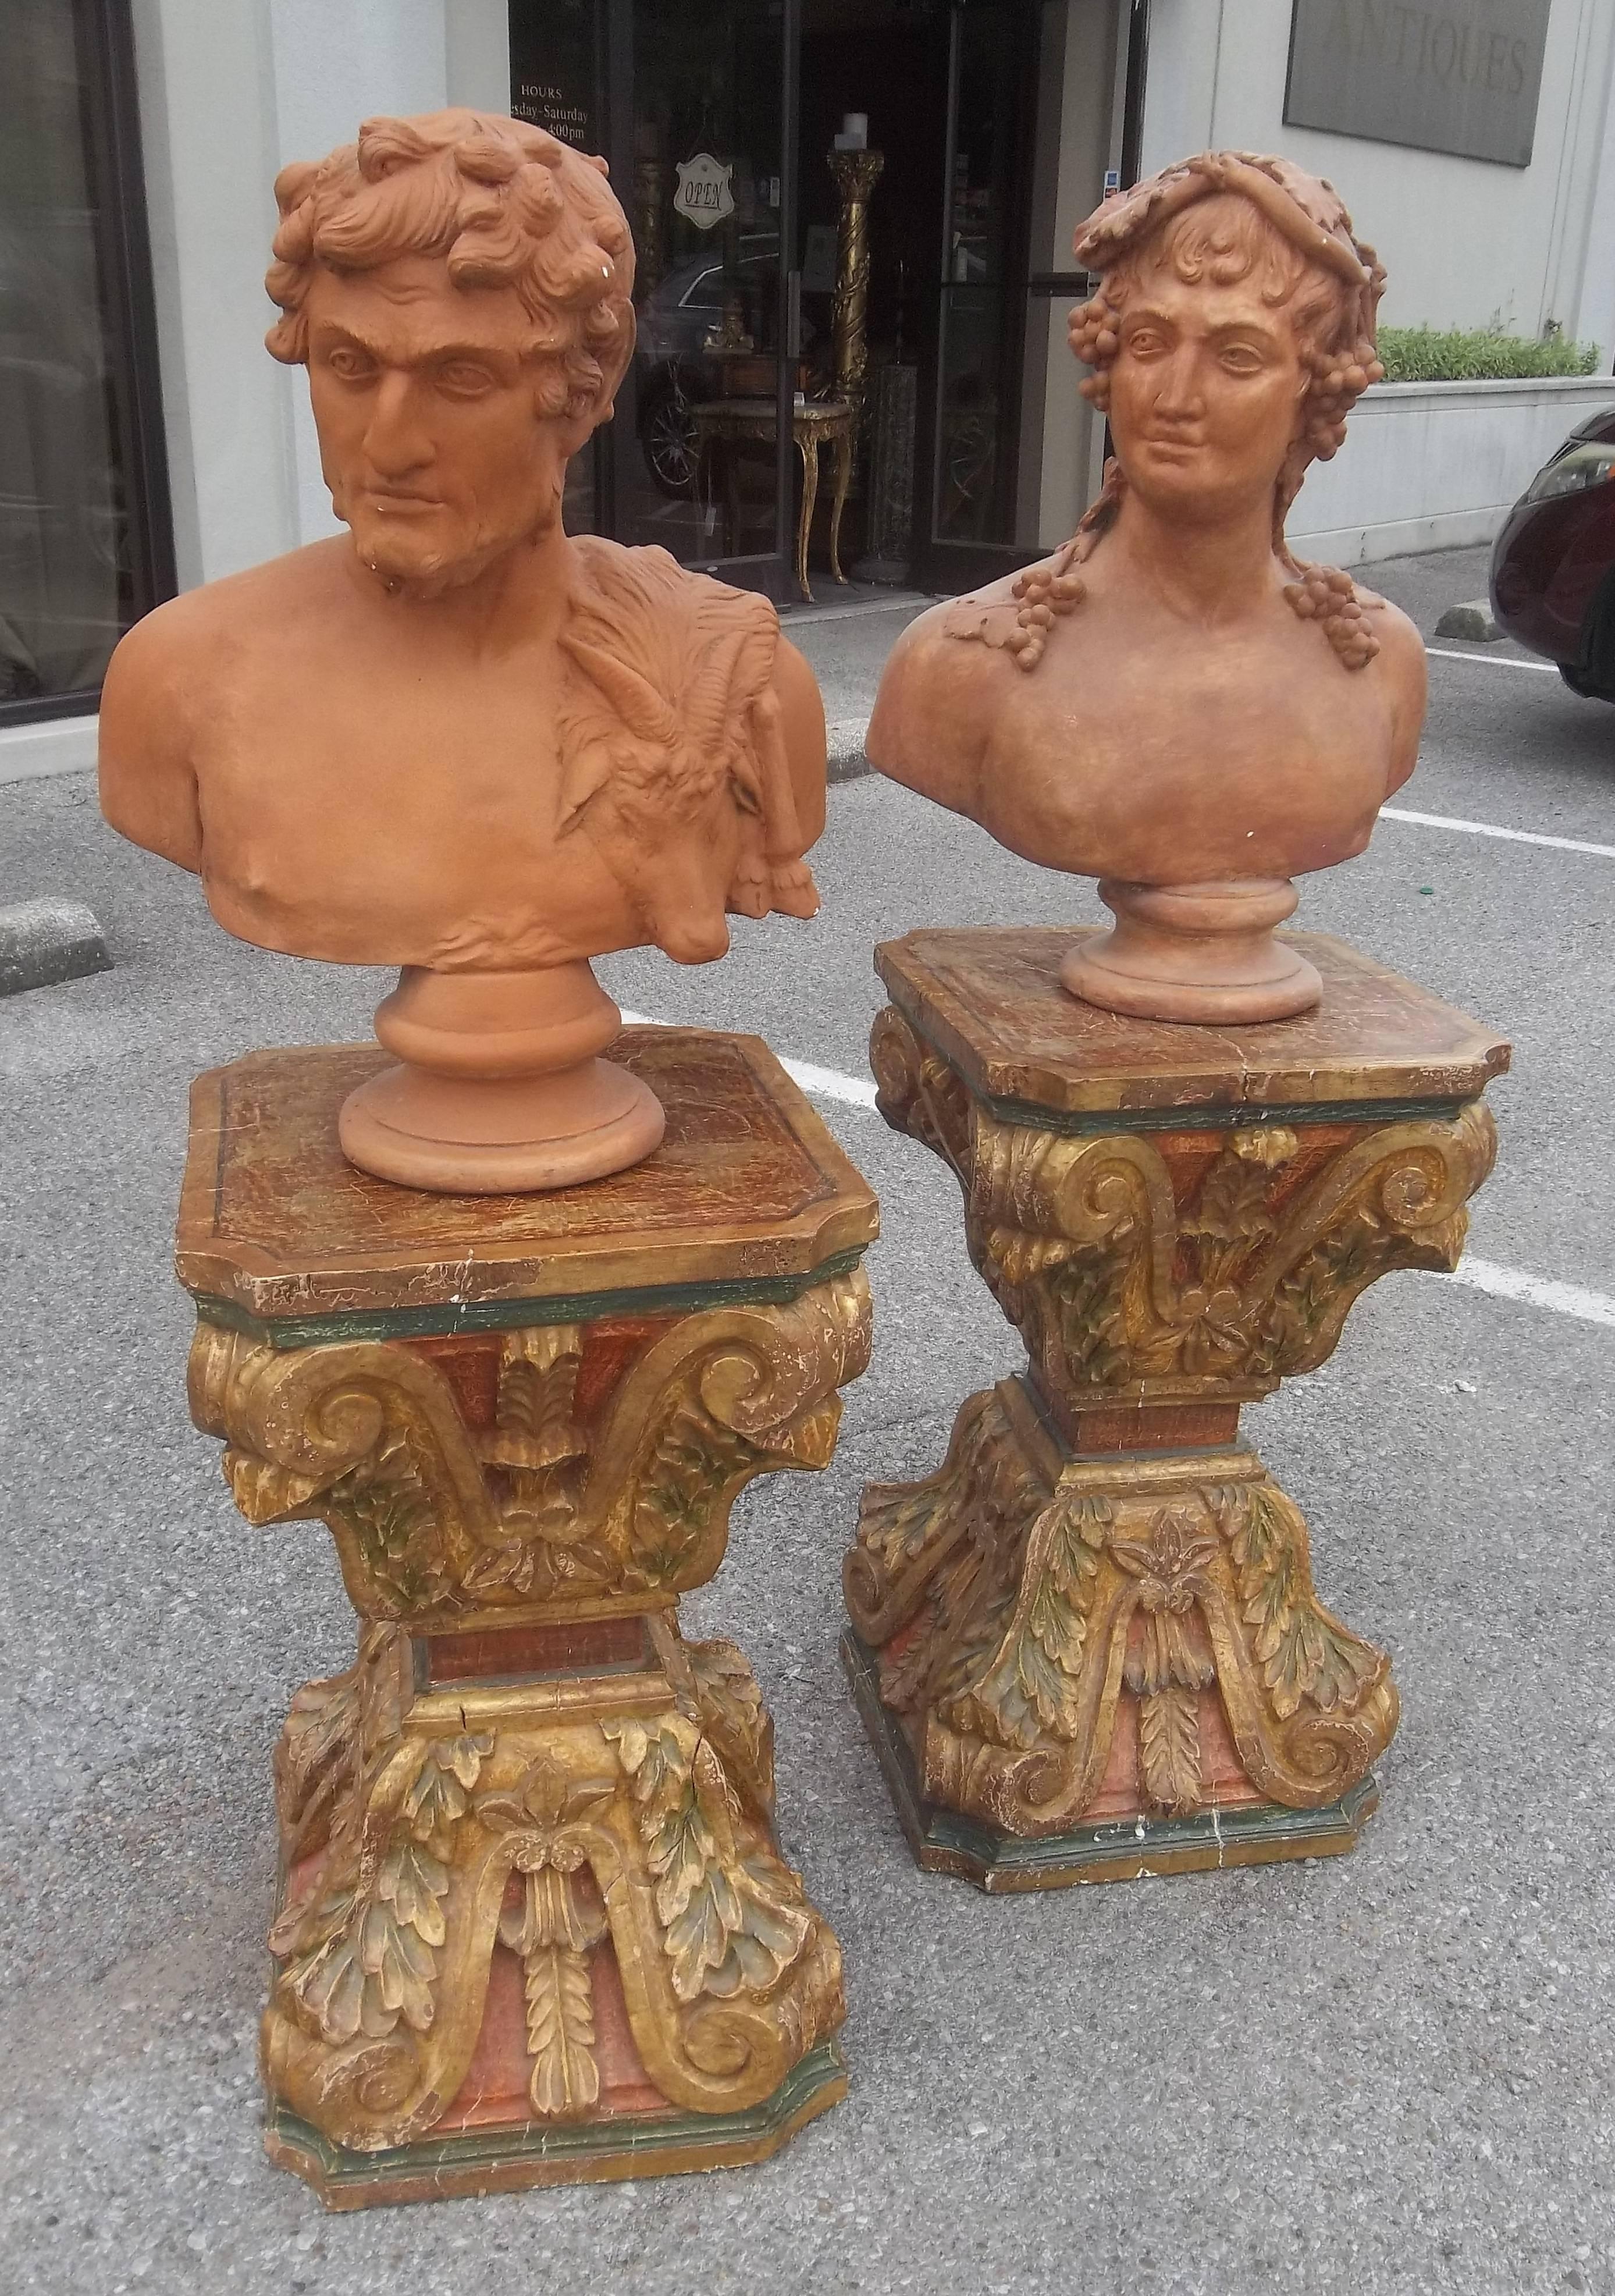 Suitable as glass table pedestals or as is .Polychrome with some gilt highlights. Finished on all four sides and top.
Stamped Italy .Signs of wear and use, cracks, separations ,minor paint loss, chipping and general aging throughout.

of some